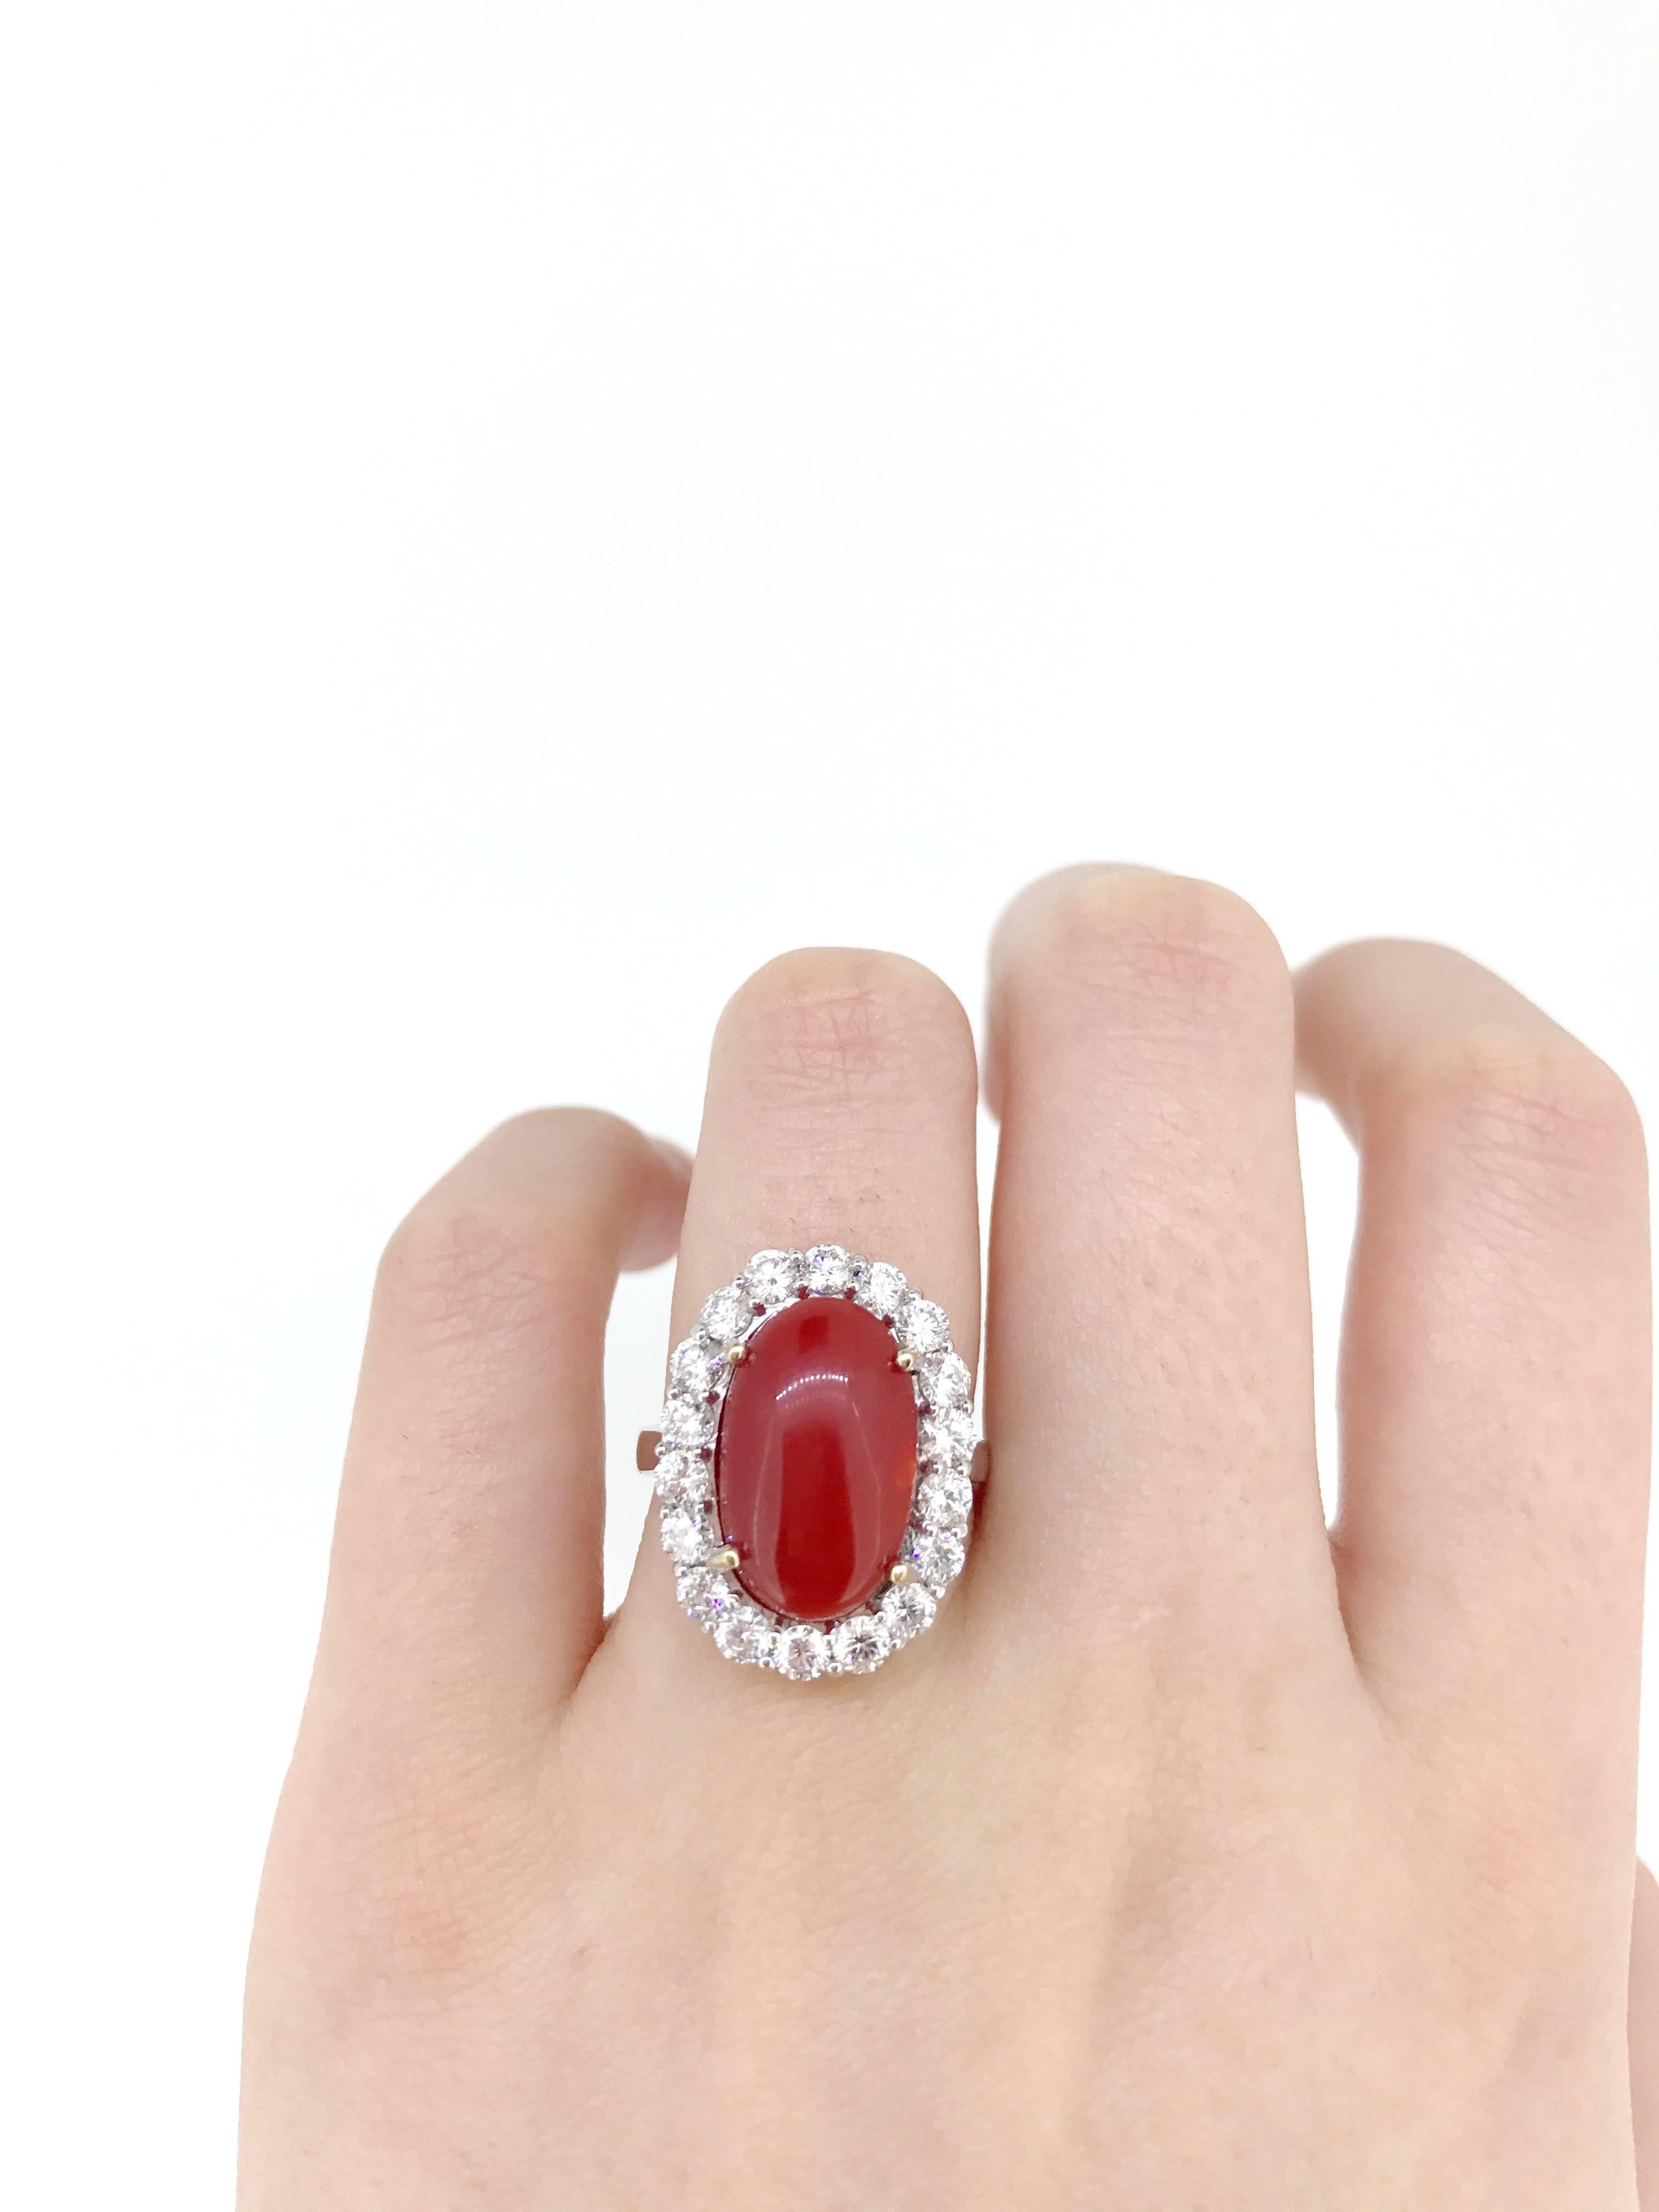 Modern 18 Karat White Gold Cabochon Red South Sea Coral and 1.8 Carat Diamond Ring For Sale